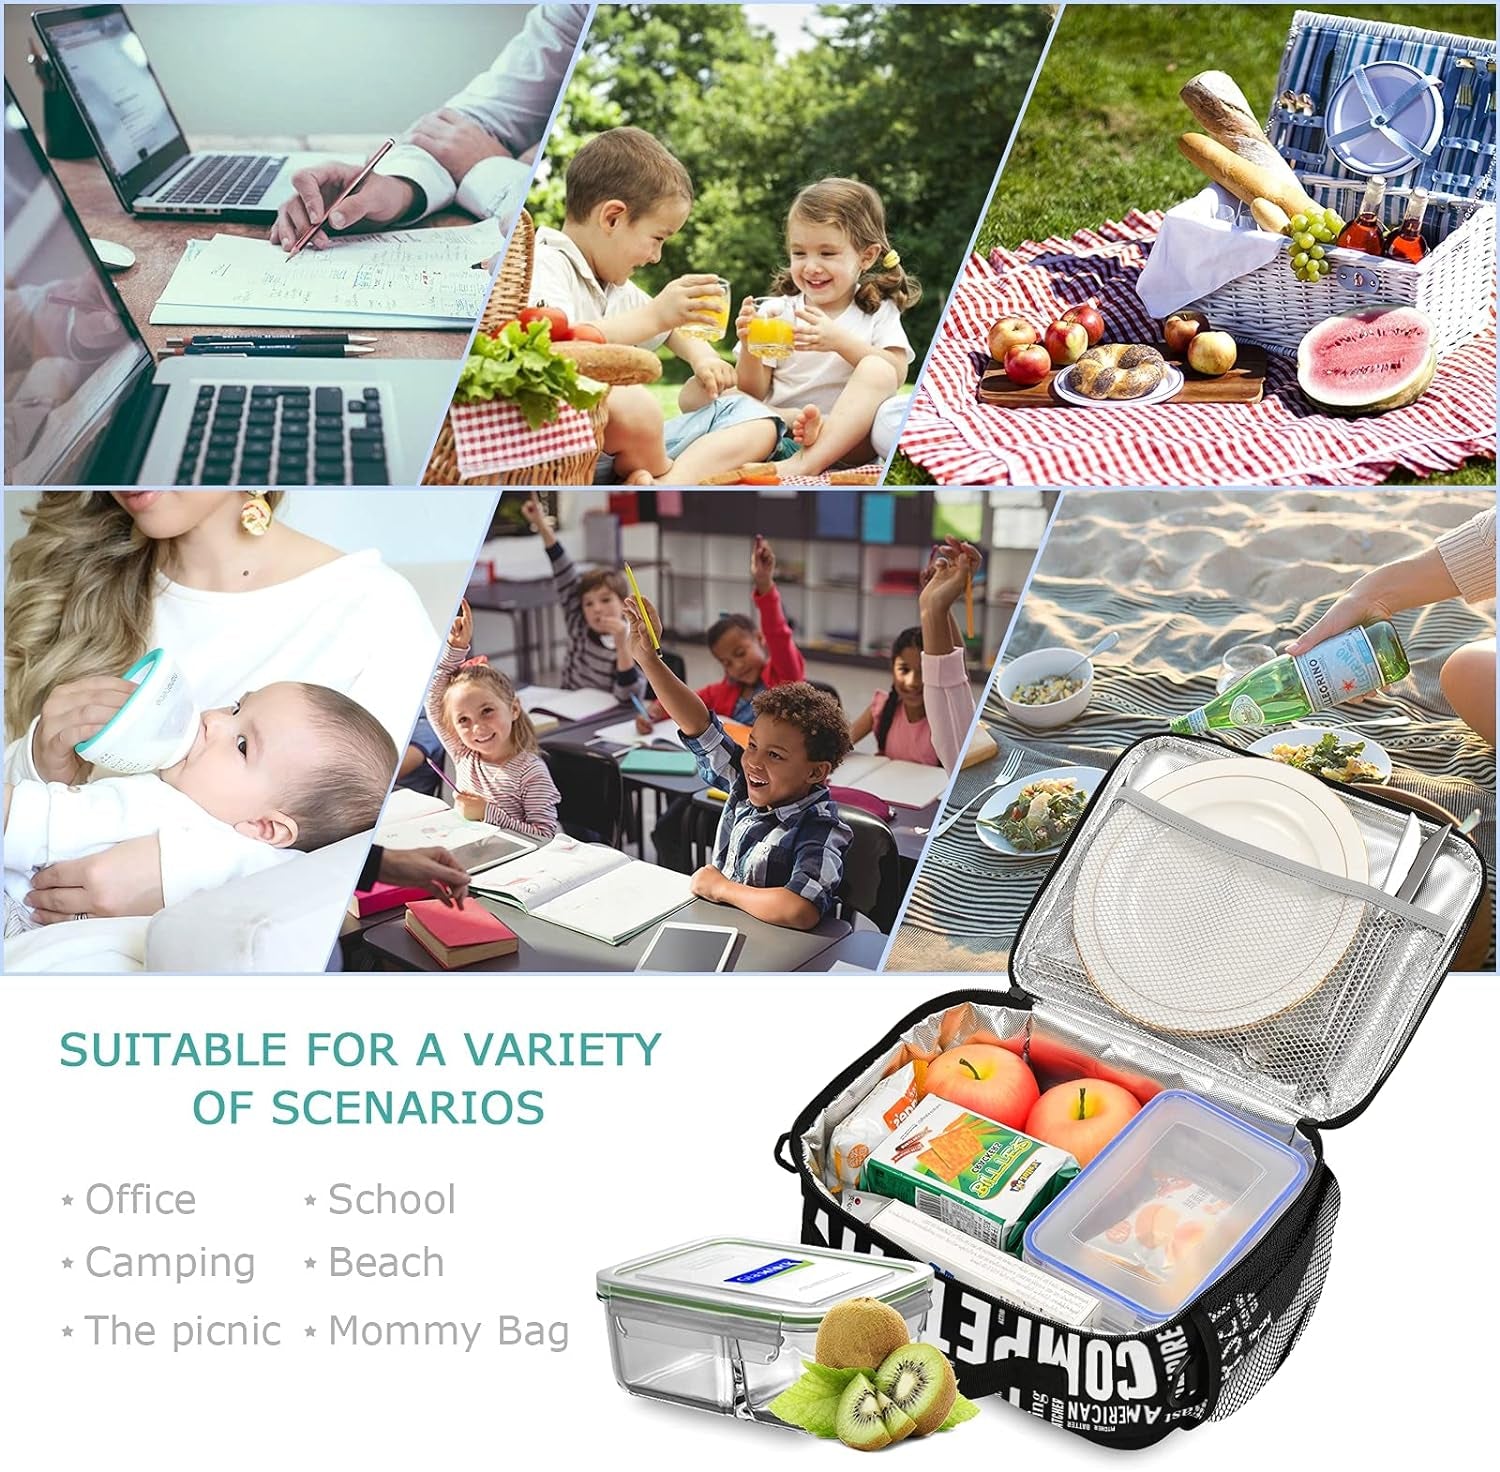 Baseball Lunch Bag Insulated Softball Sport Lunch Box Cooler Bag Cooling Tote Food Container for Men Women Kids